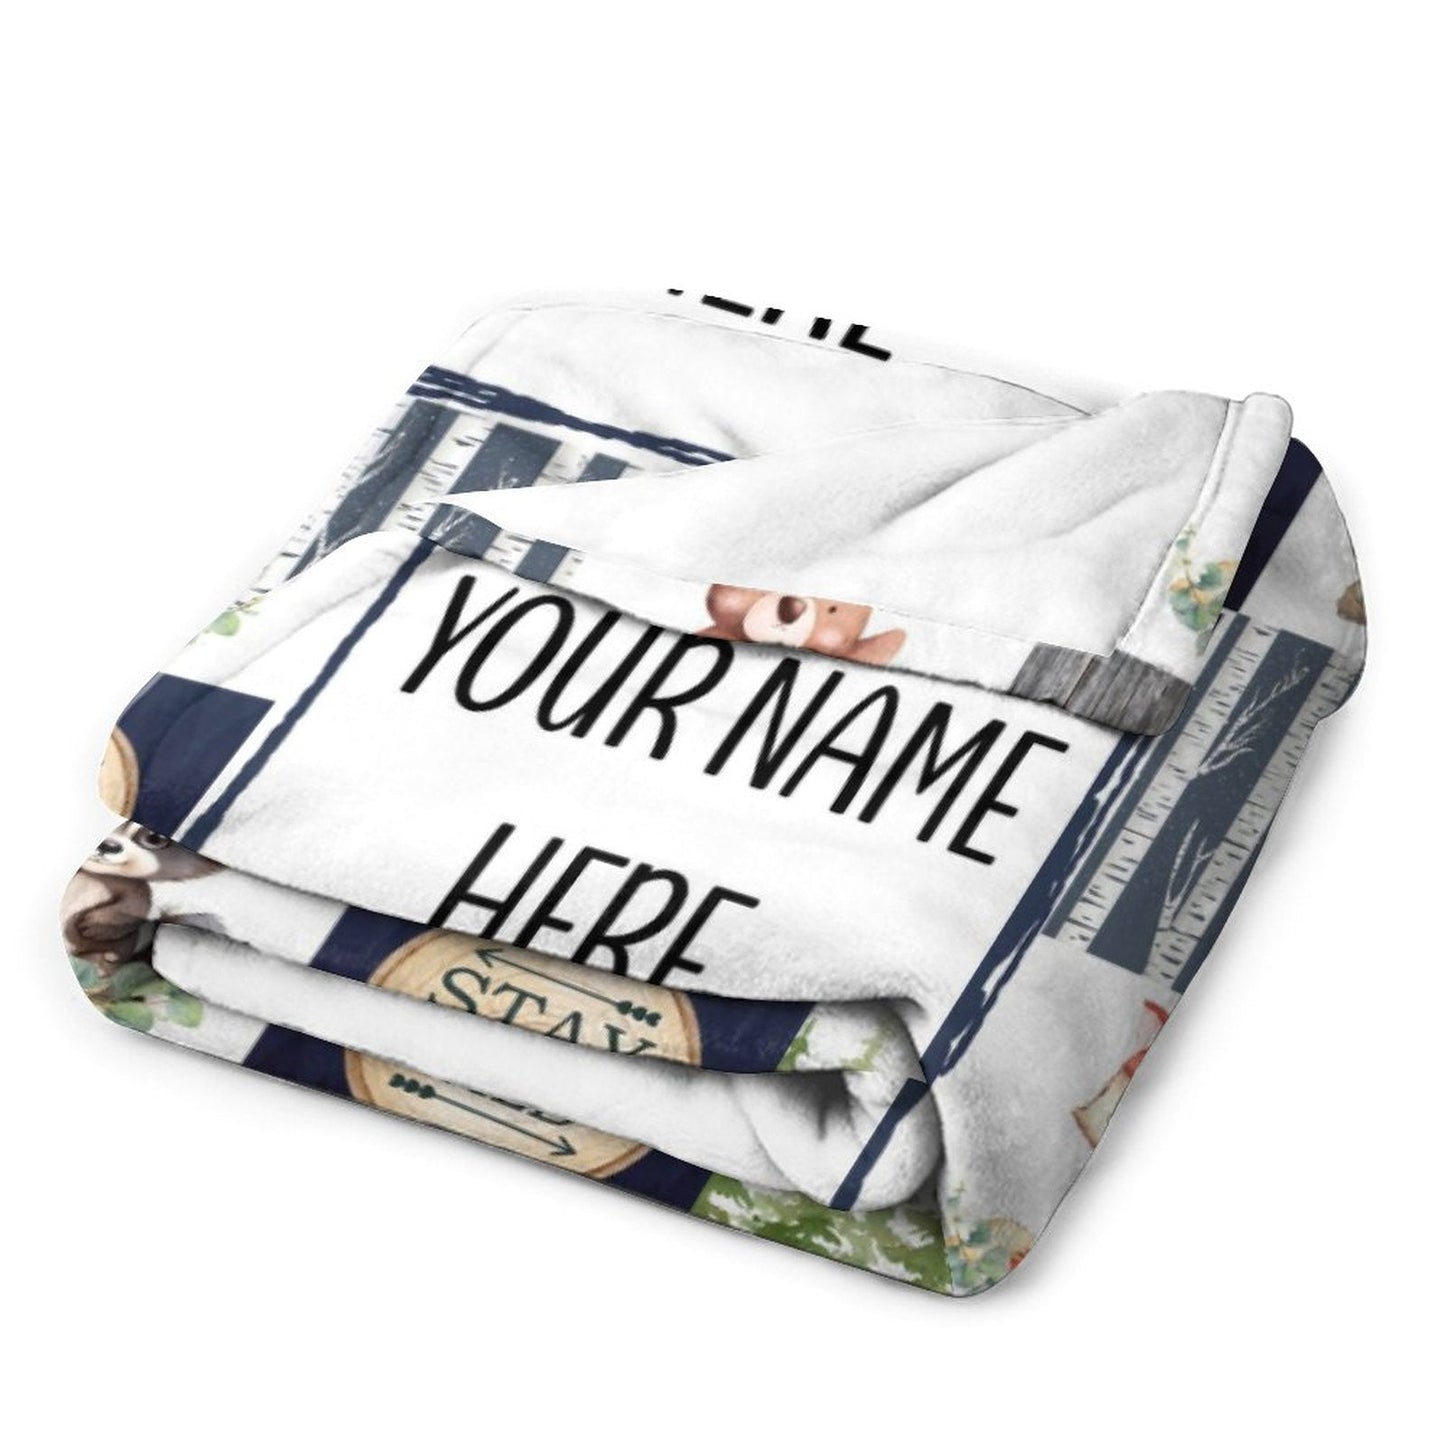 ️Customized Baby Name Personalized Woodland Blankets for Girls